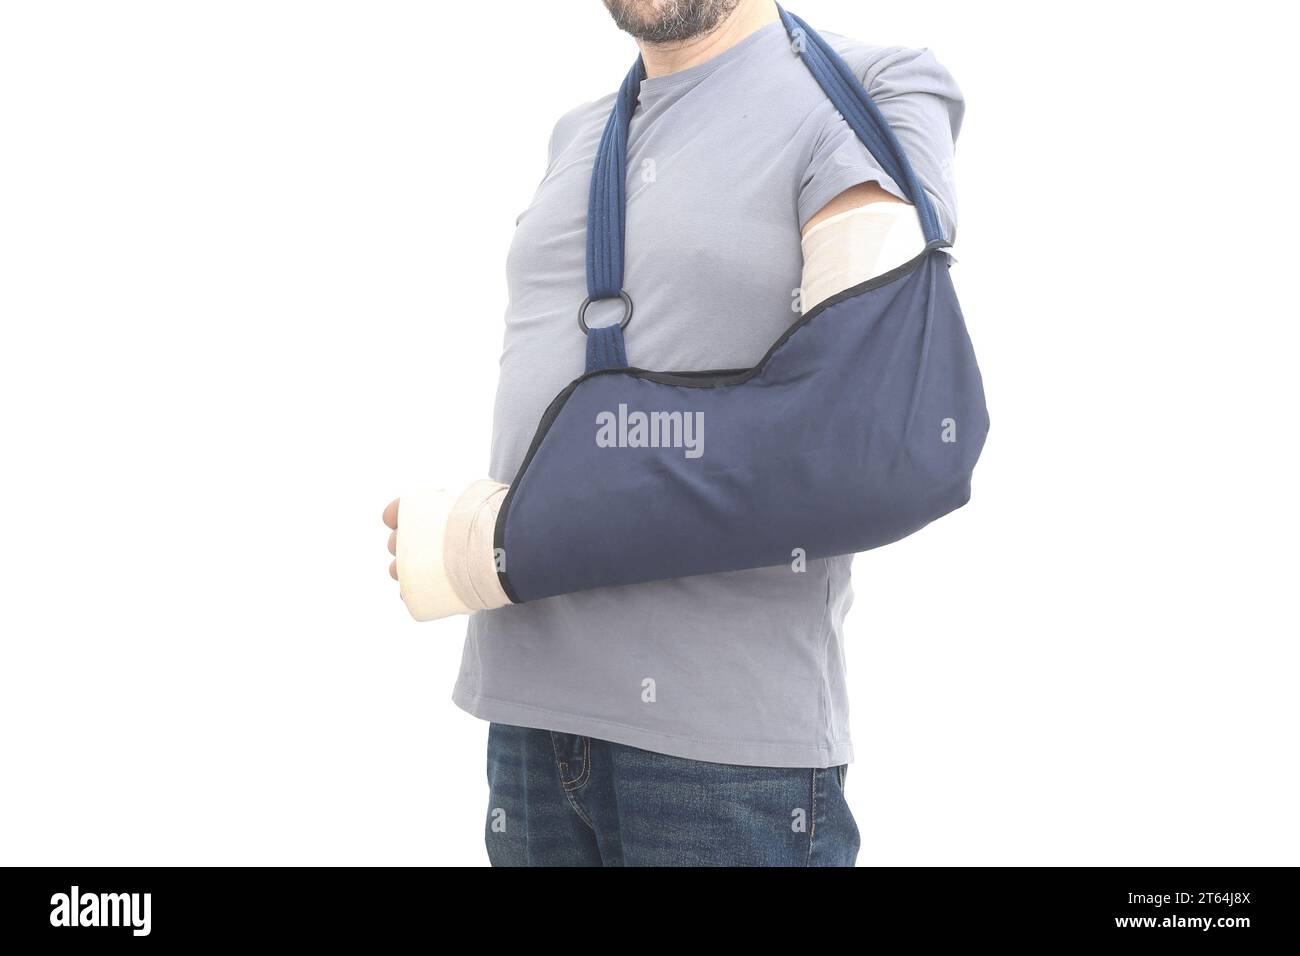 fracture in the arm bandaged and wrapped in a brace Stock Photo